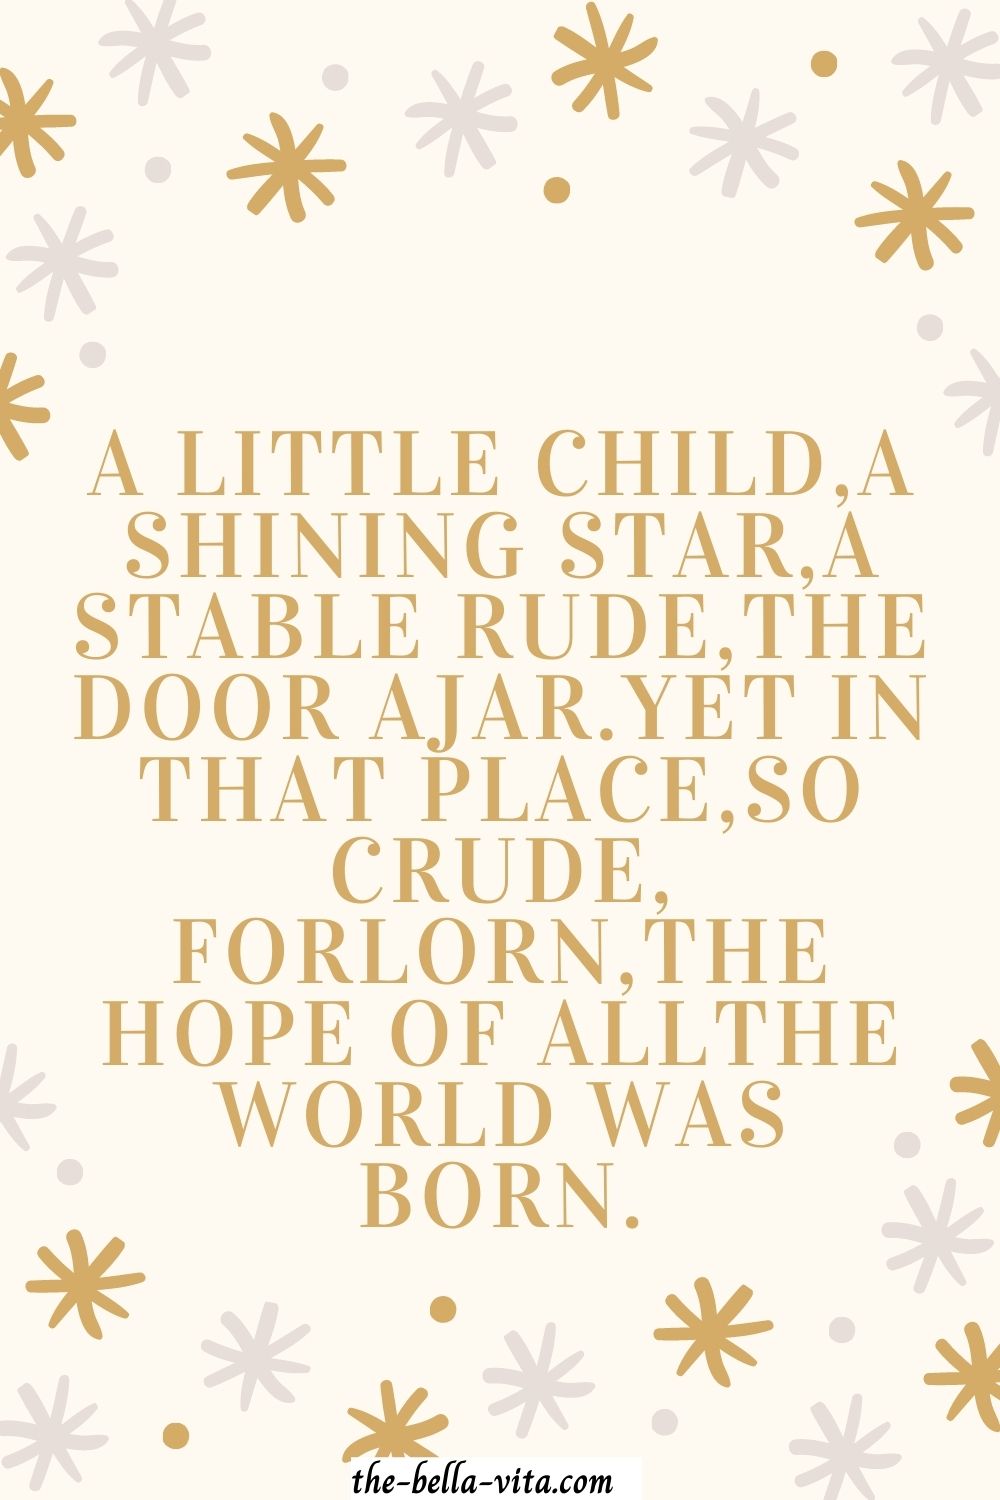 The Most Beautiful Christmas Quotes - The Bella Vita